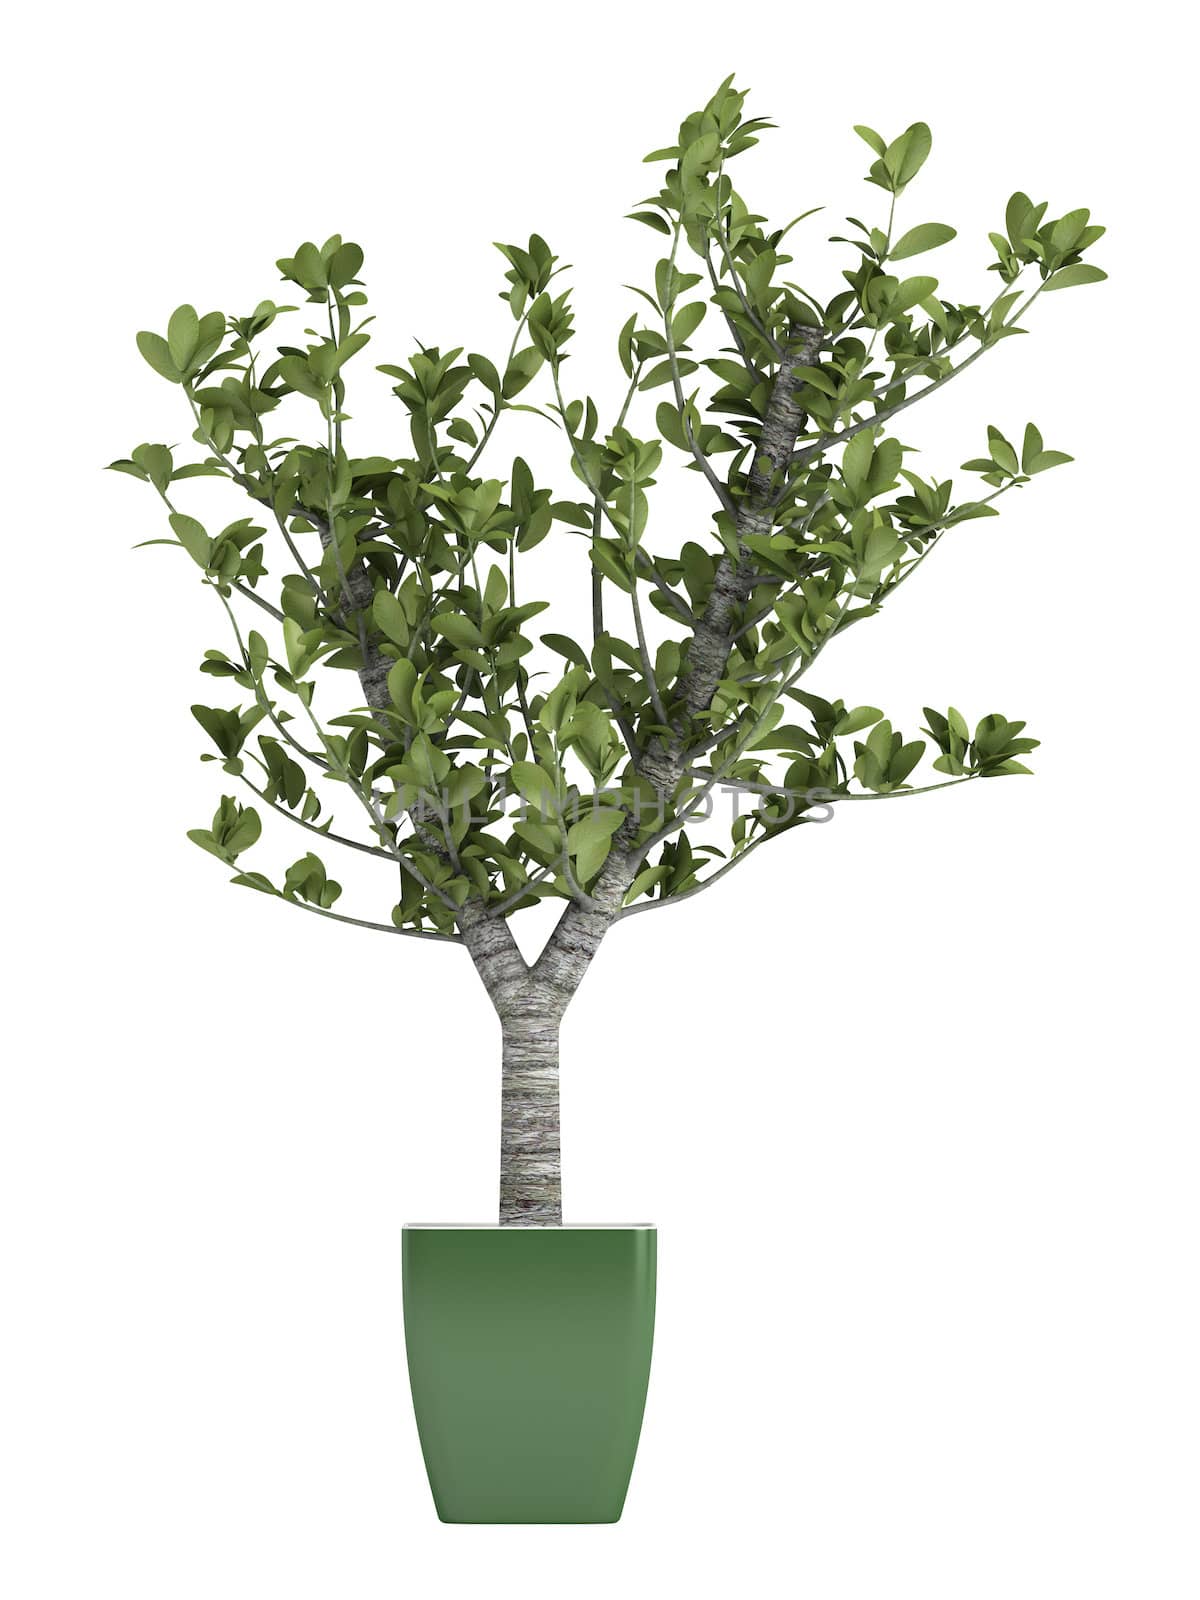 Bonsai tree in a green pot isolated on white background